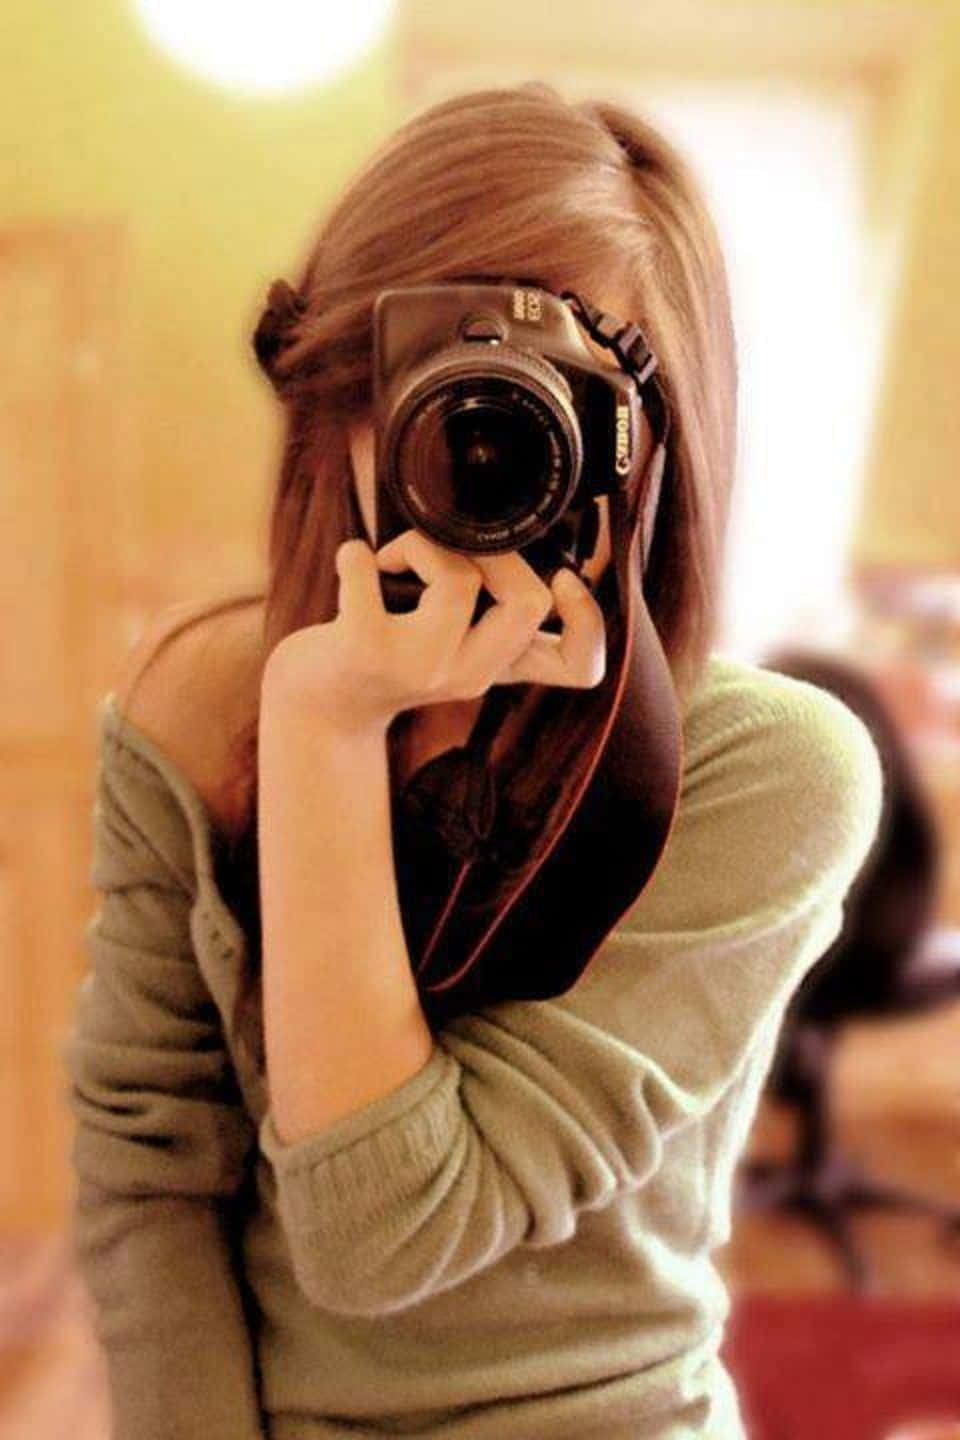 Download Cute Woman Profile With A Face Camera Wallpaper ...